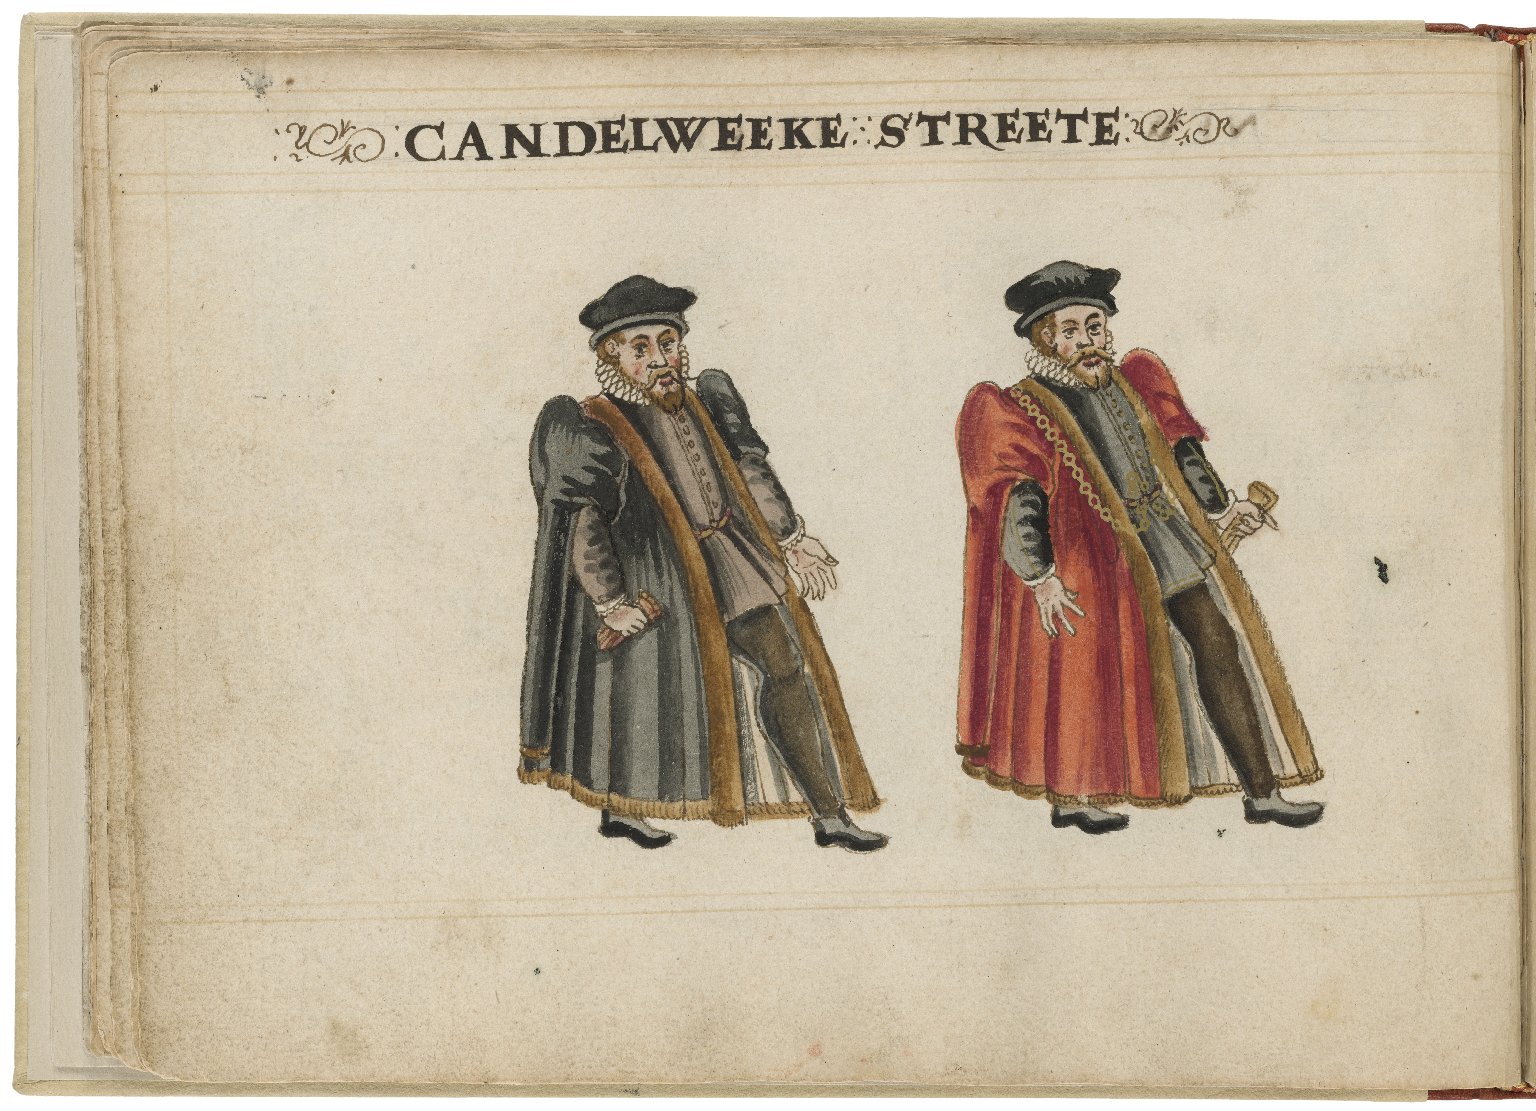 Watercolour painting of the alderman and deputy in charge of Candlewick Street Ward by Hugh Alley. Image courtesy of the Folger Digital Image Collection.